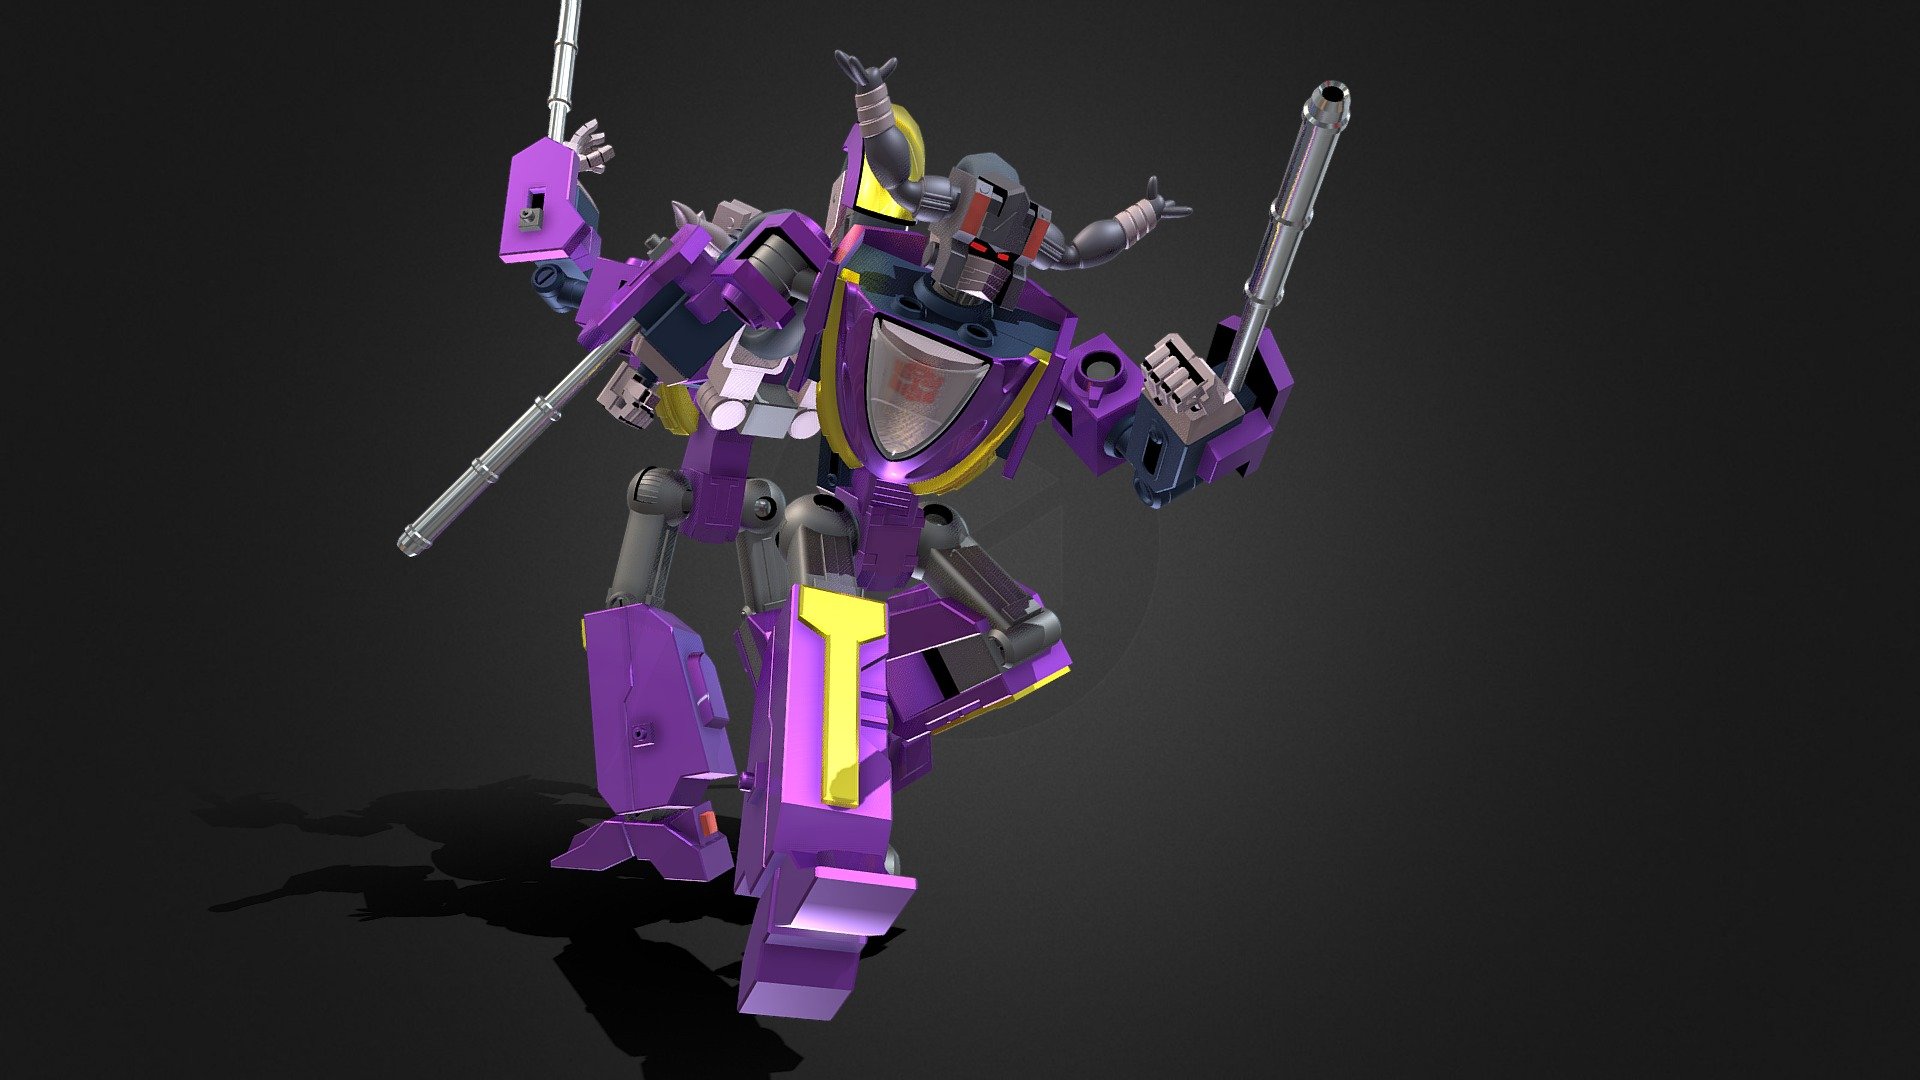 If you're interested in purchasing any of my models, contact me @ andrewdisaacs@yahoo.com

Sideways (Double Face) from Transformers Armada (Micron Legend). 

Made by myself in 3DS Max 3d model